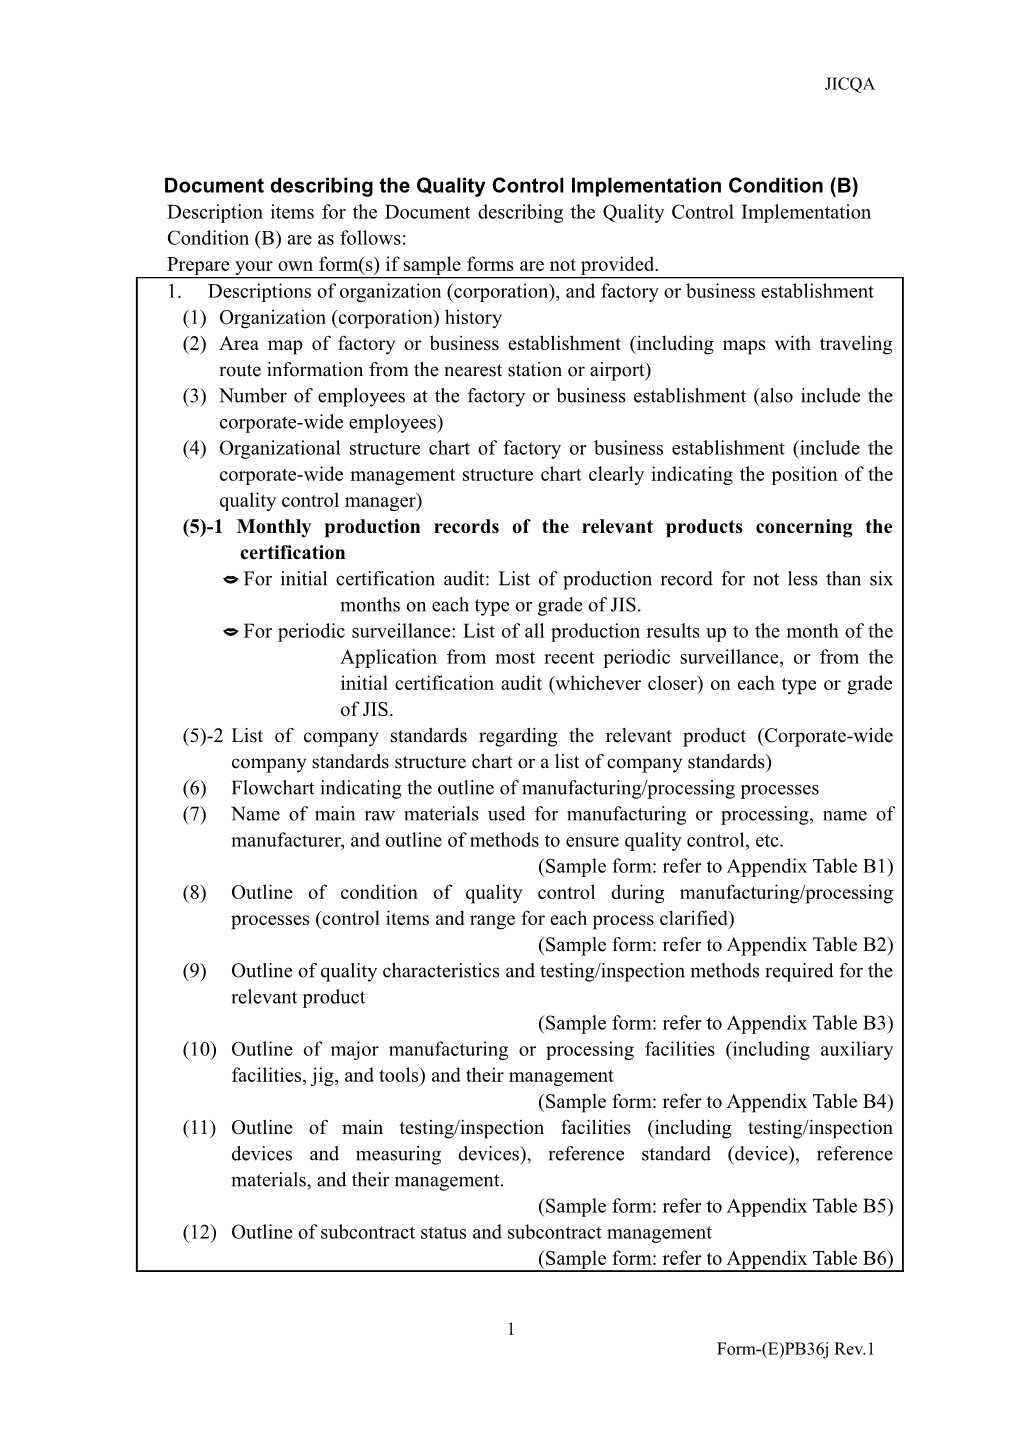 Document Describing the Quality Control Implementation Condition (B)